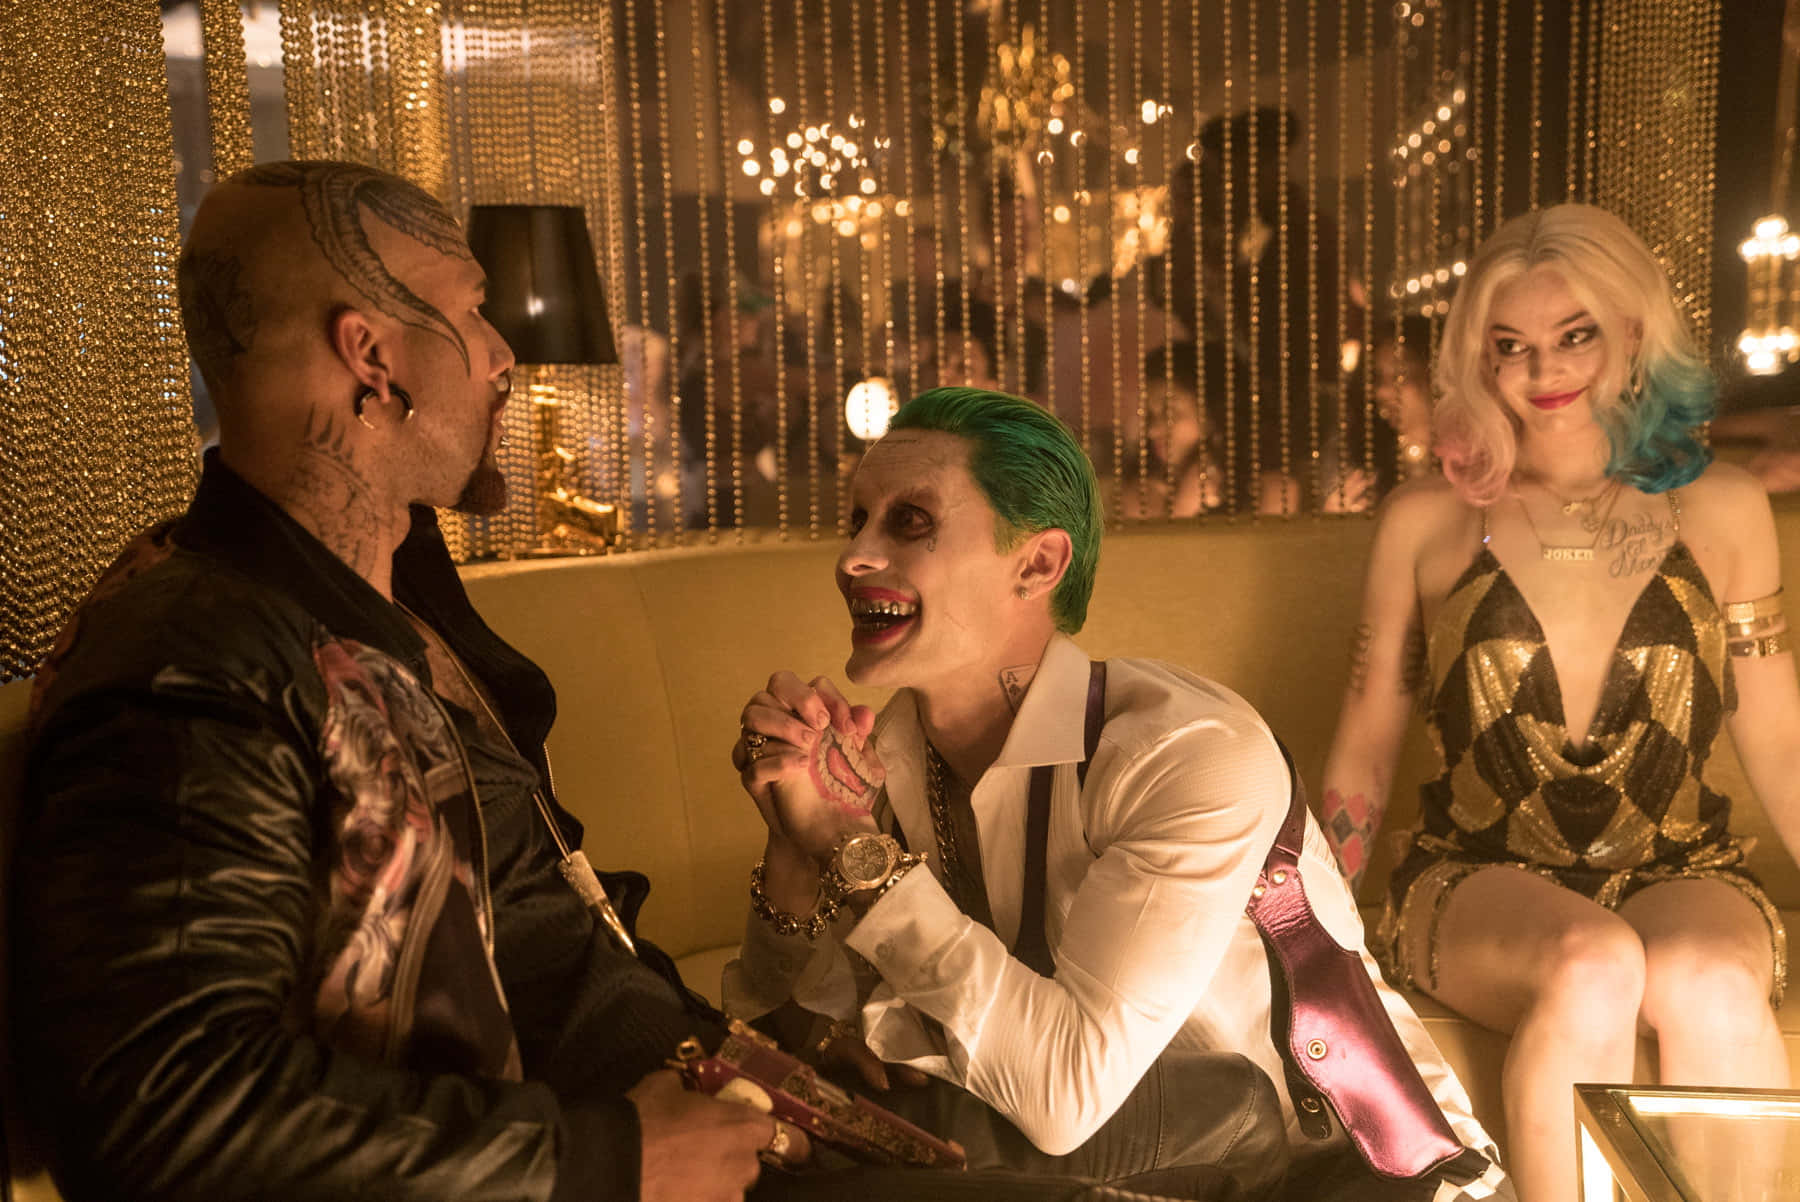 "the Madness Of Love: Joker And Harley Quinn From Suicide Squad." Wallpaper